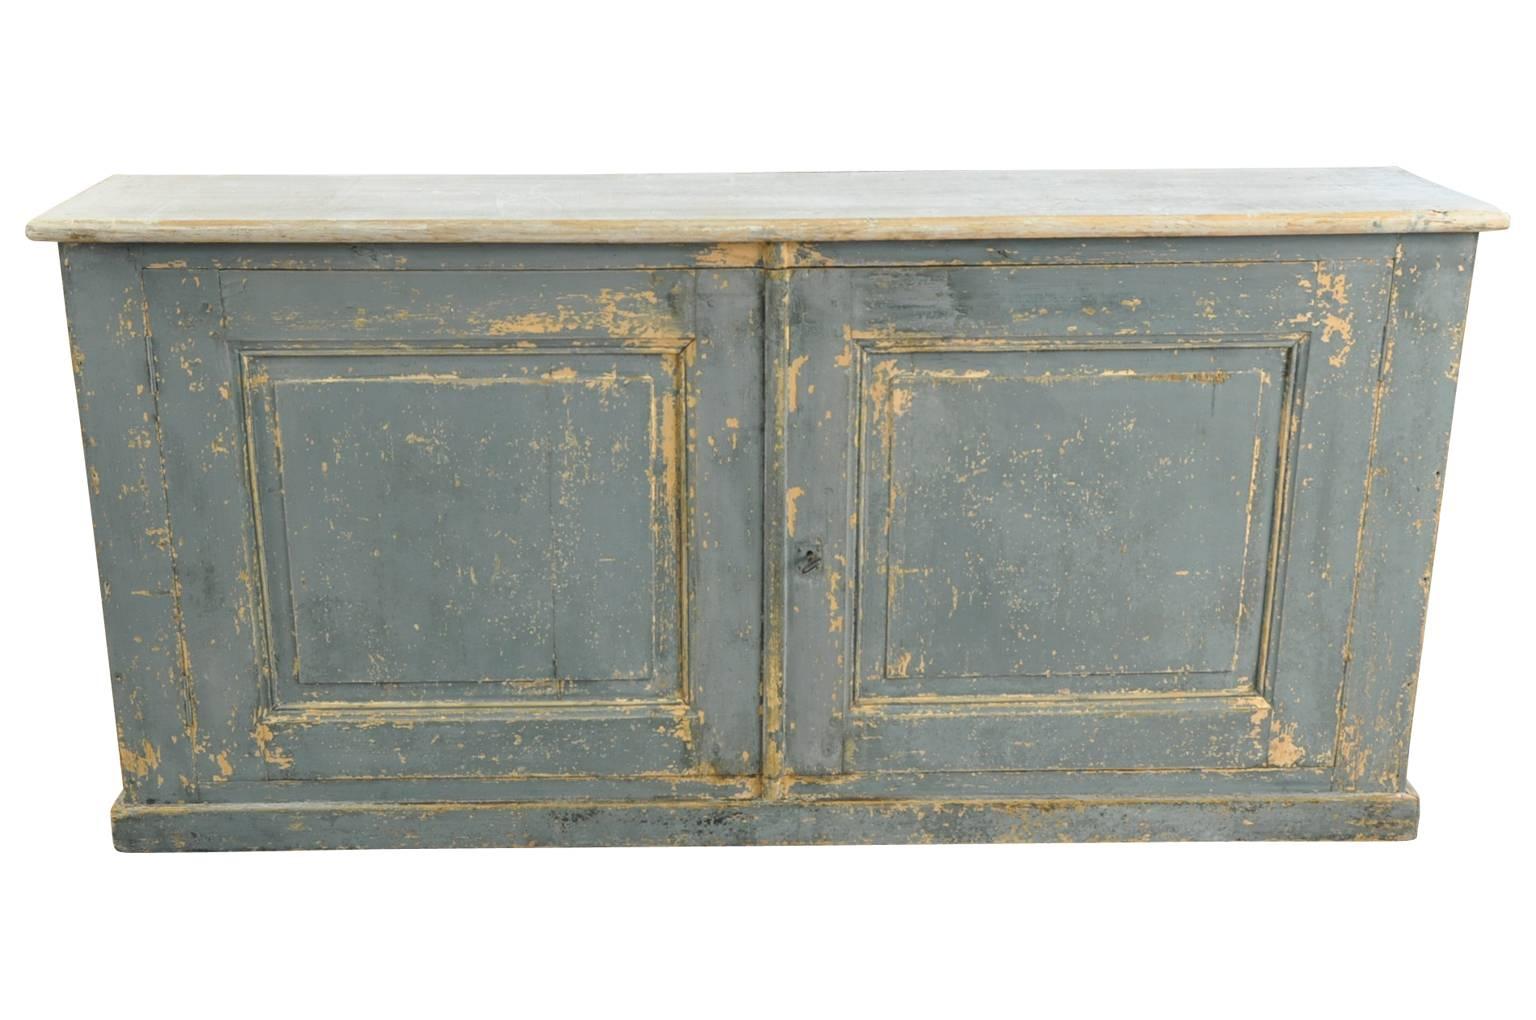 A charming later 19th century buffet from the South of France. Soundly constructed from painted wood. Terrific narrow depth. Wonderful painted finish and patina.